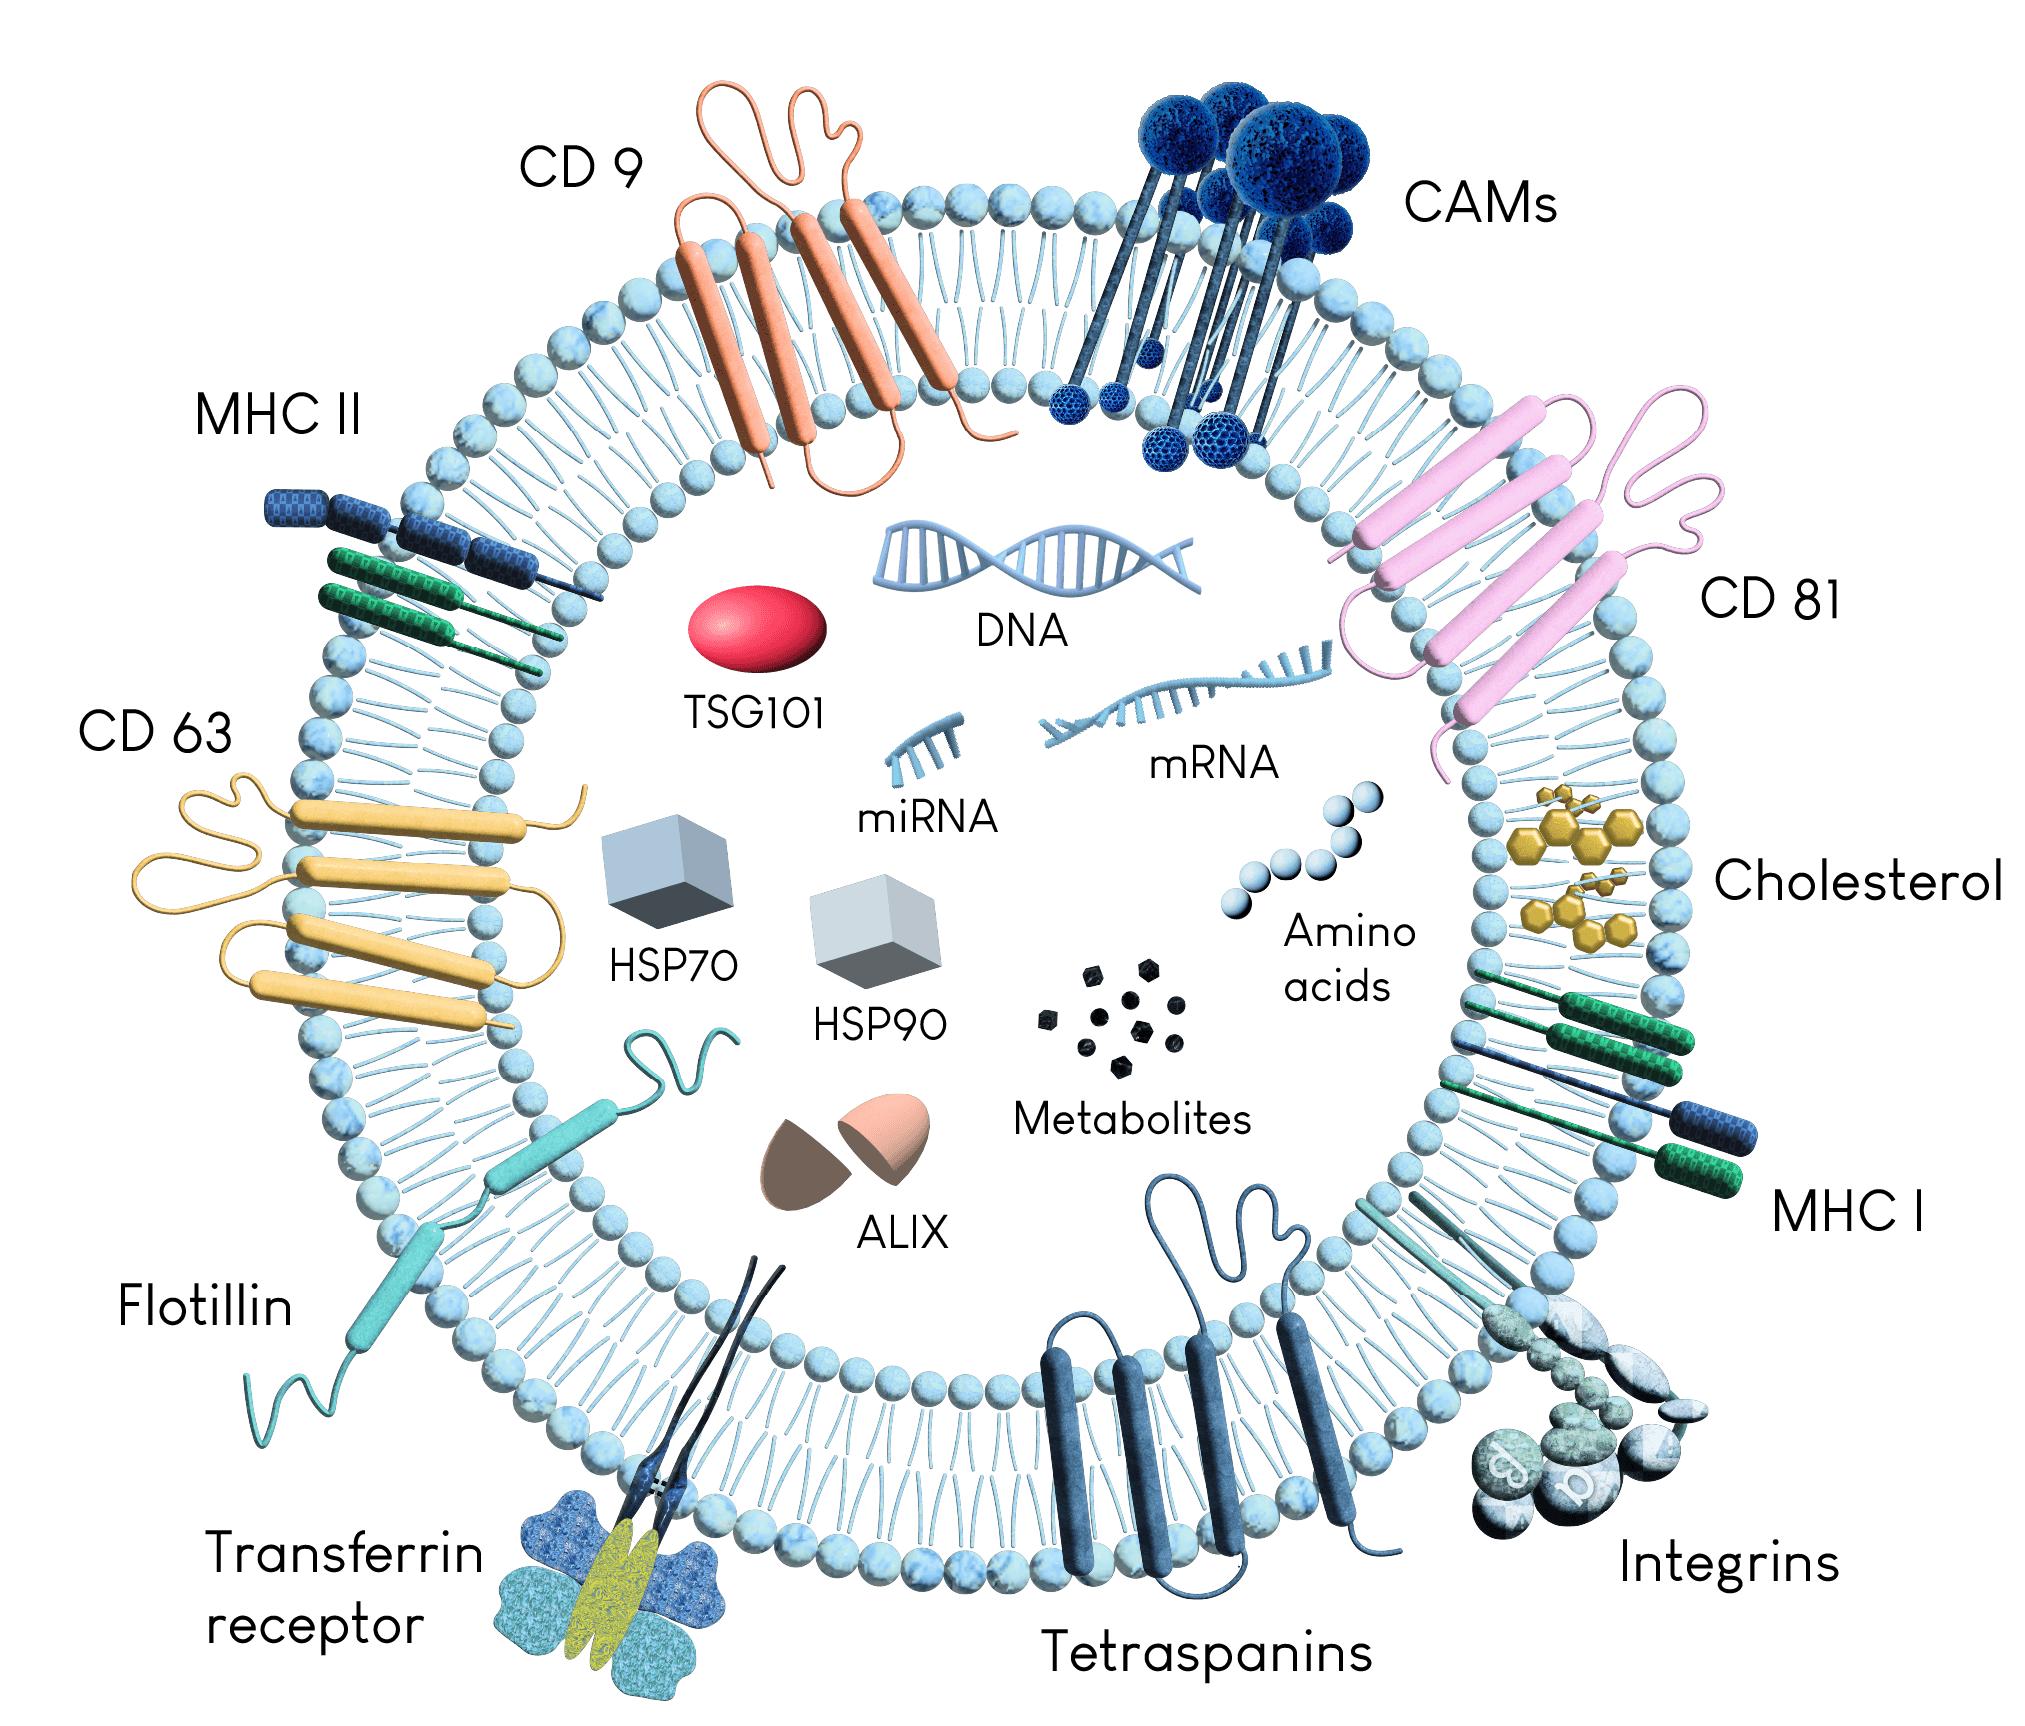 Illustration depicting the structure of exosomes, which are extracellular vesicles containing nucleic acids, proteins, lipids, and metabolites. Exosomes are secreted by cells into the extracellular space for intercellular communication.